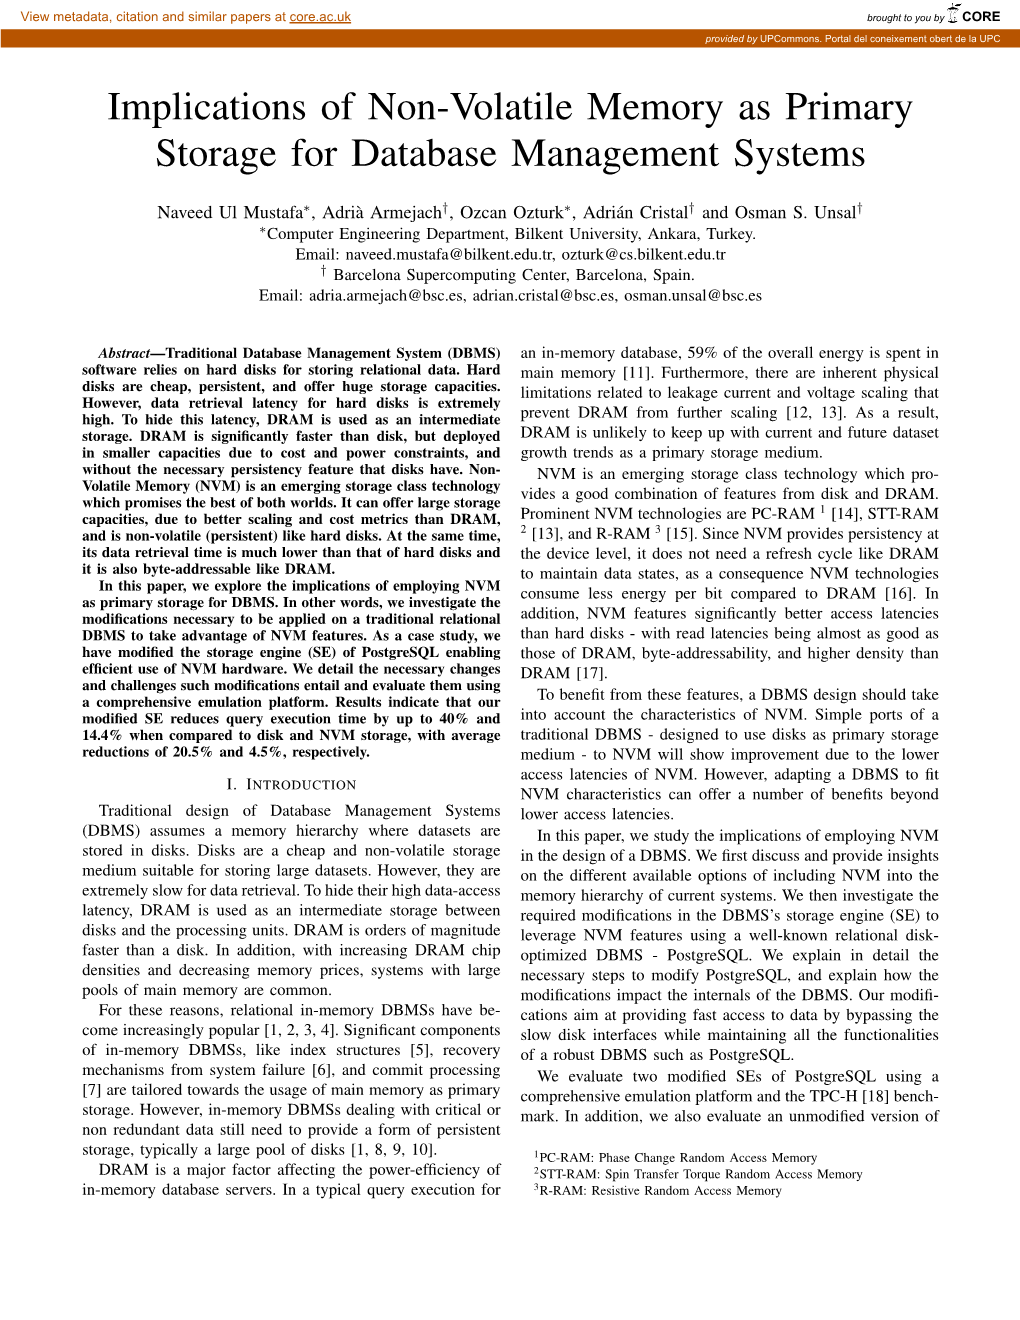 Implications of Non-Volatile Memory As Primary Storage for Database Management Systems